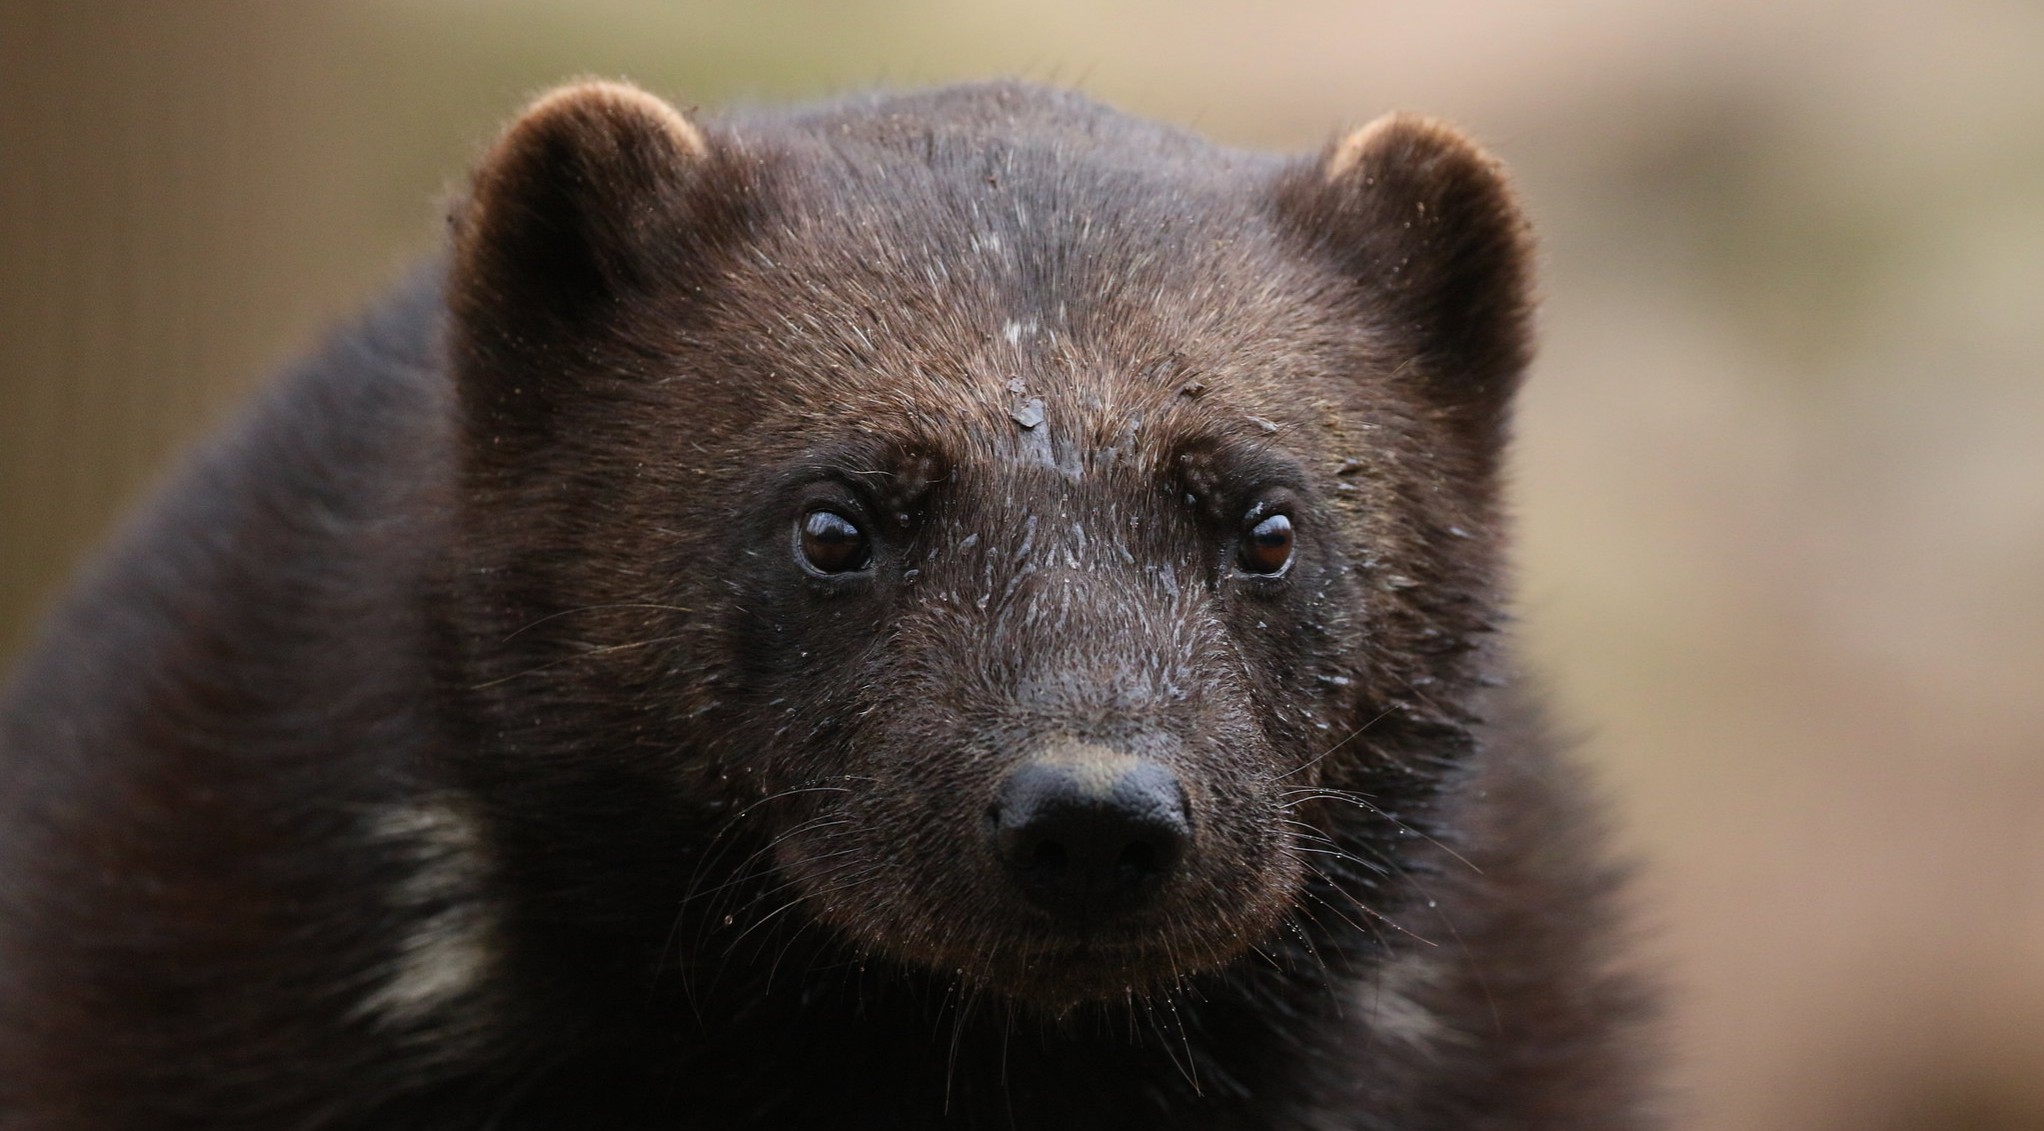 Keeping the Wolverine Wild in a Climate Crisis